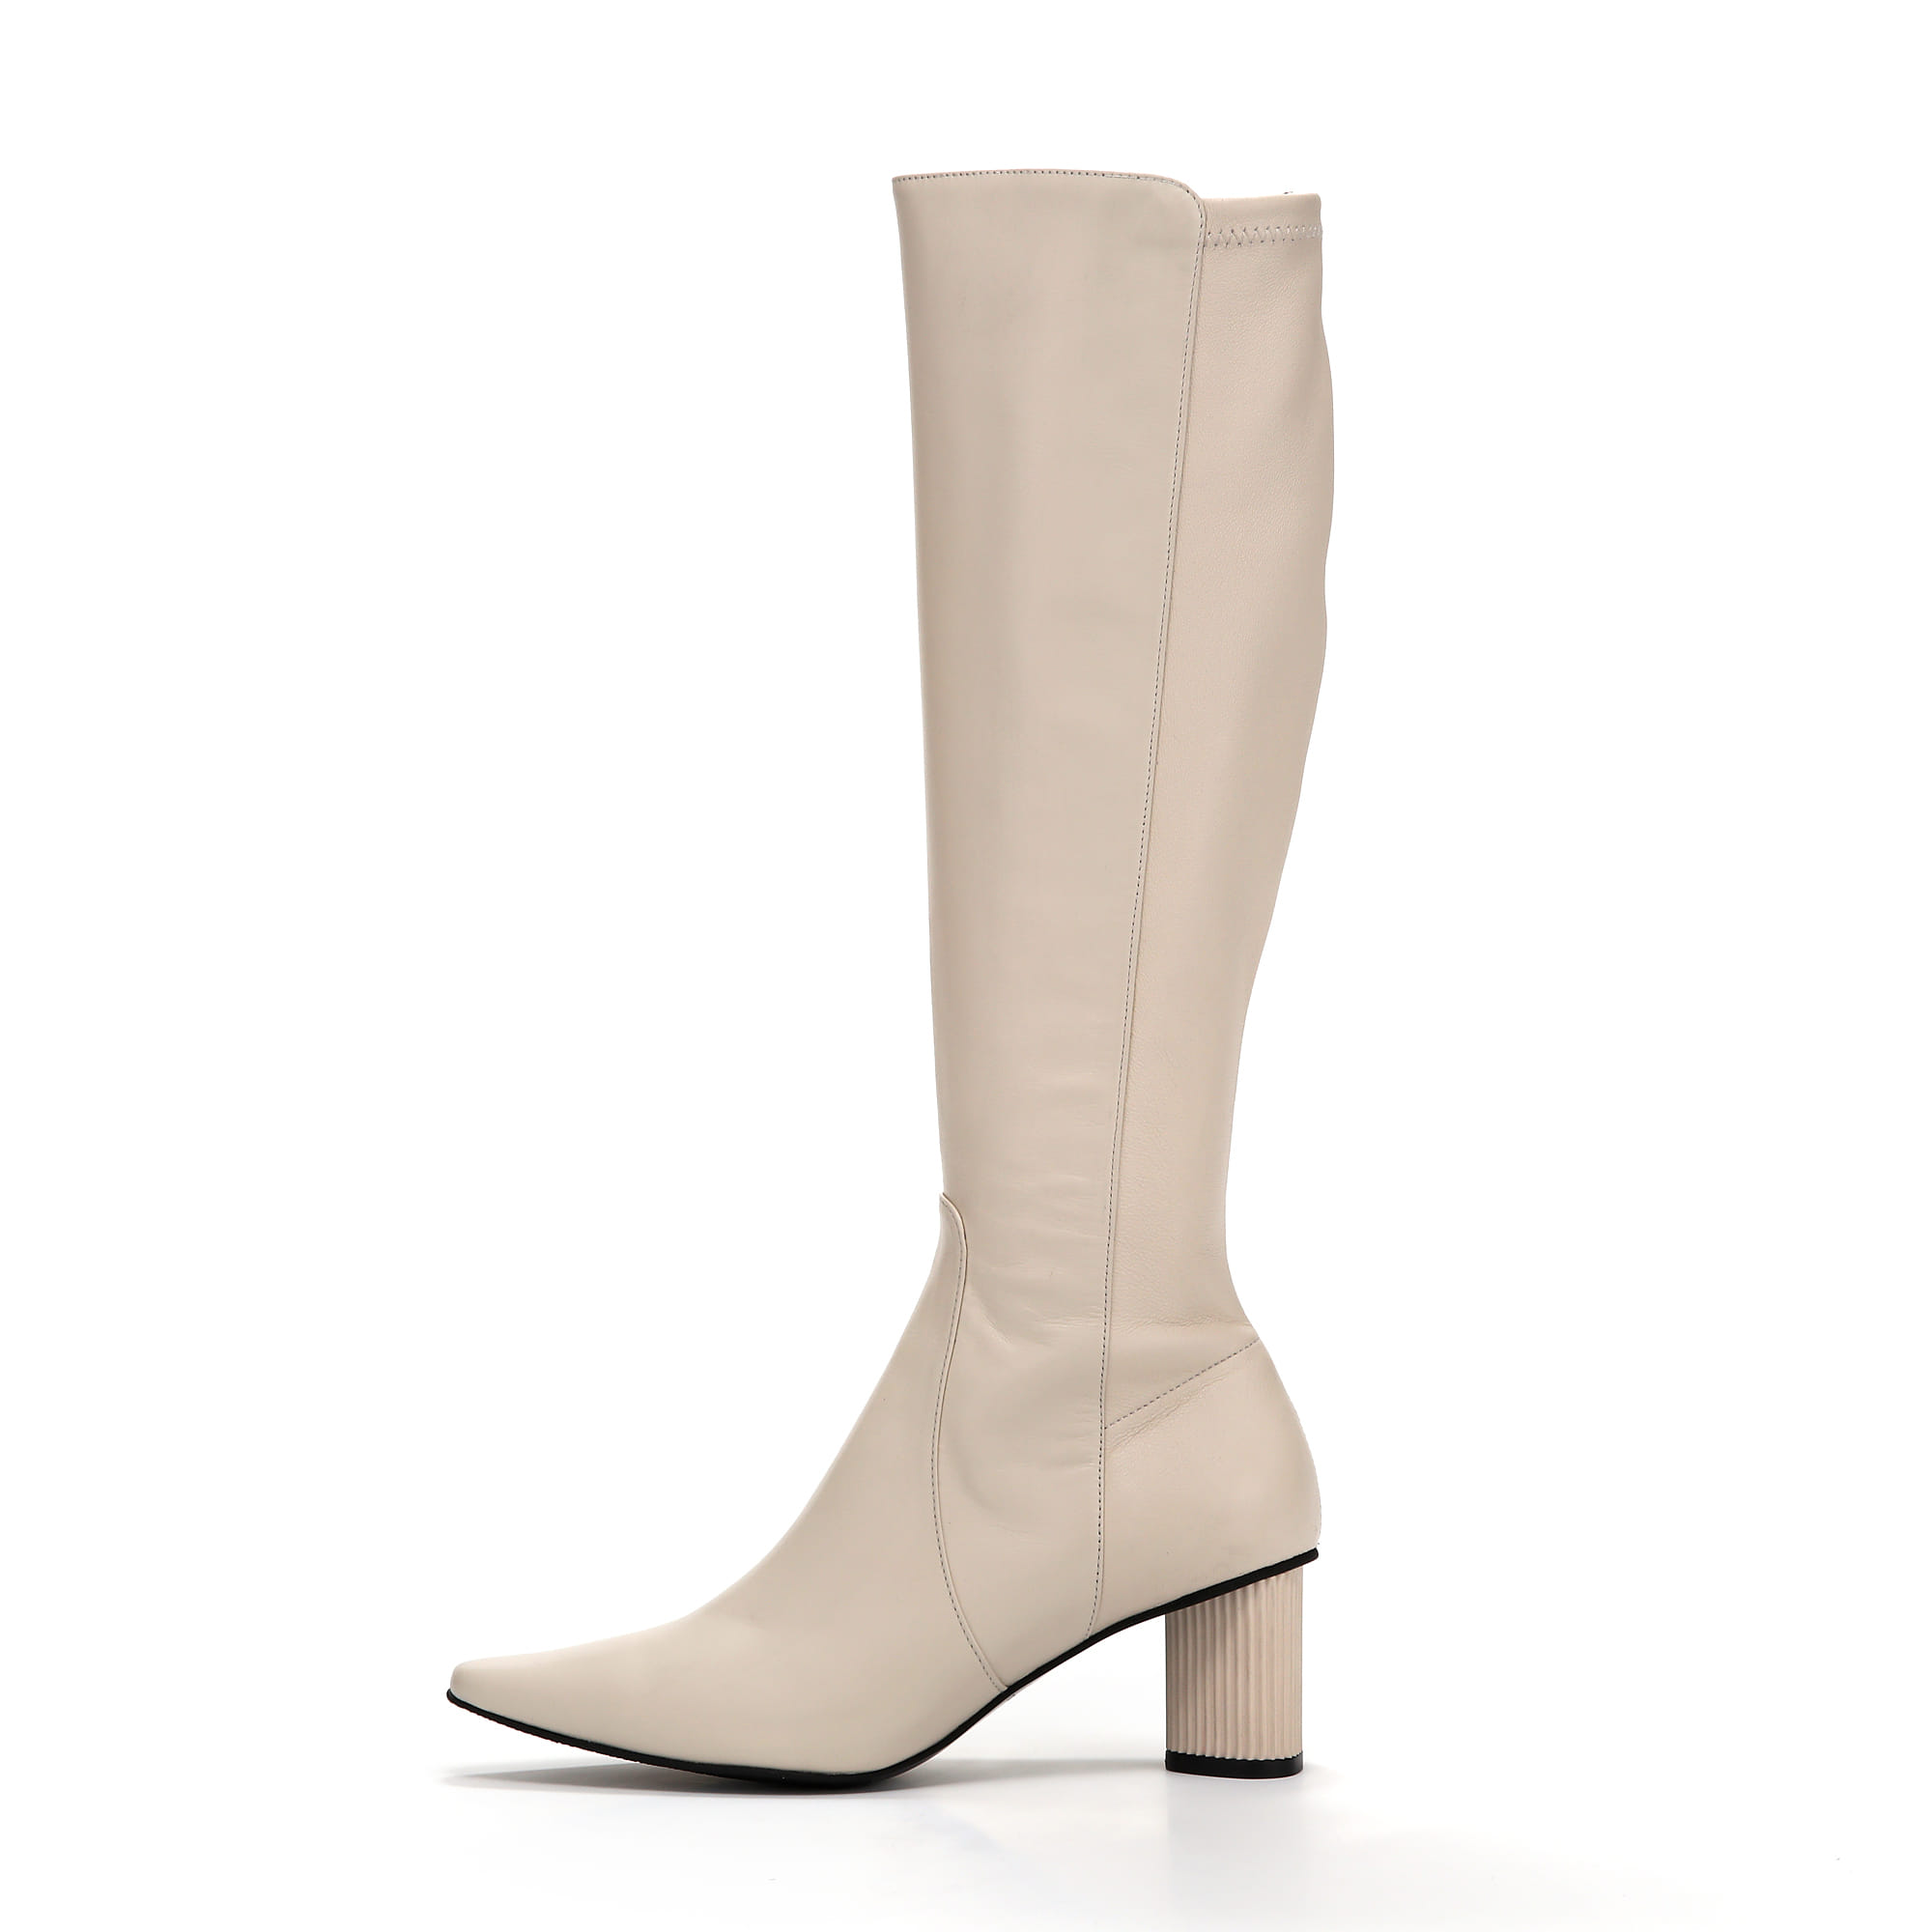 Ivory long boots